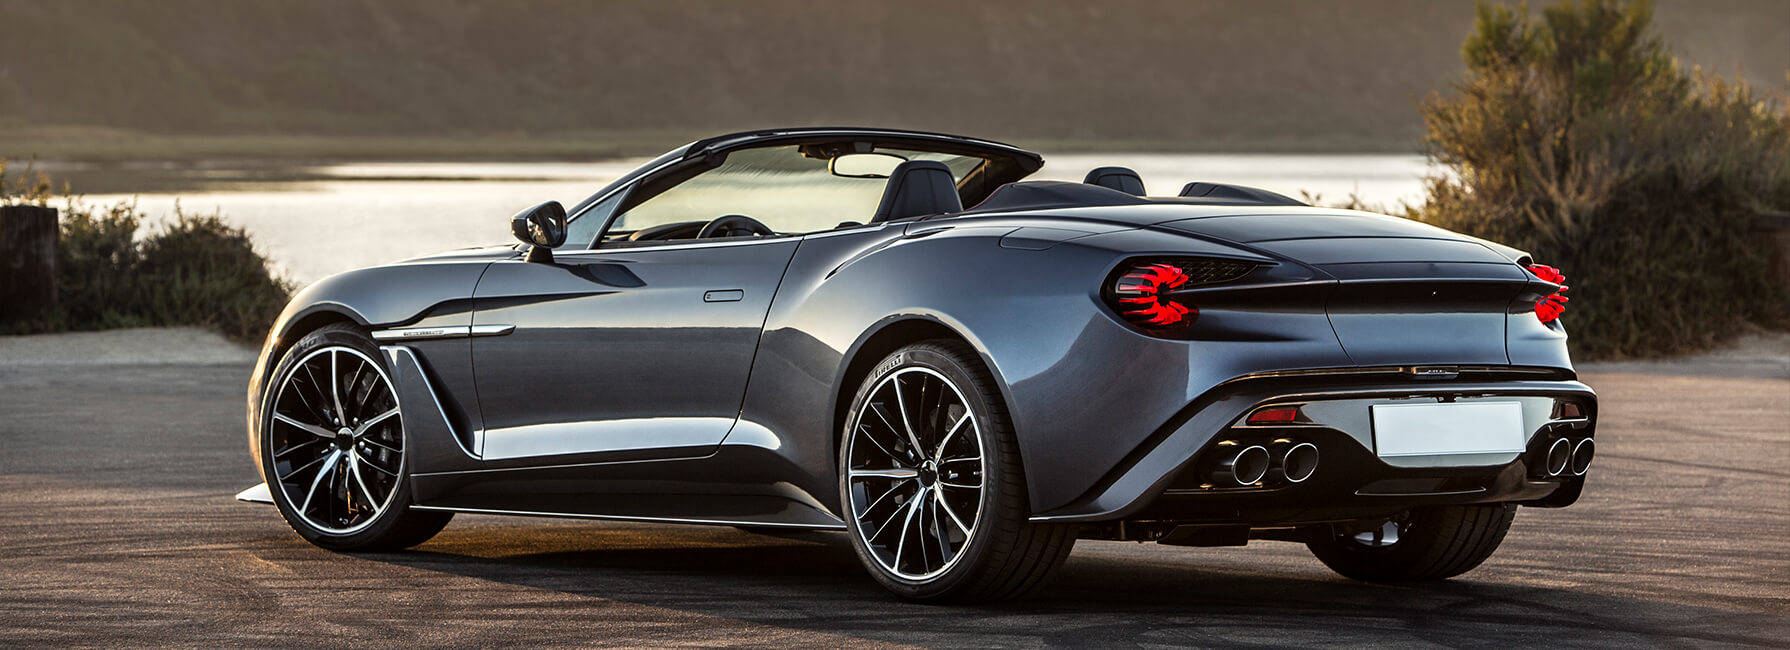 Back and side view of luxury sports car with roof off